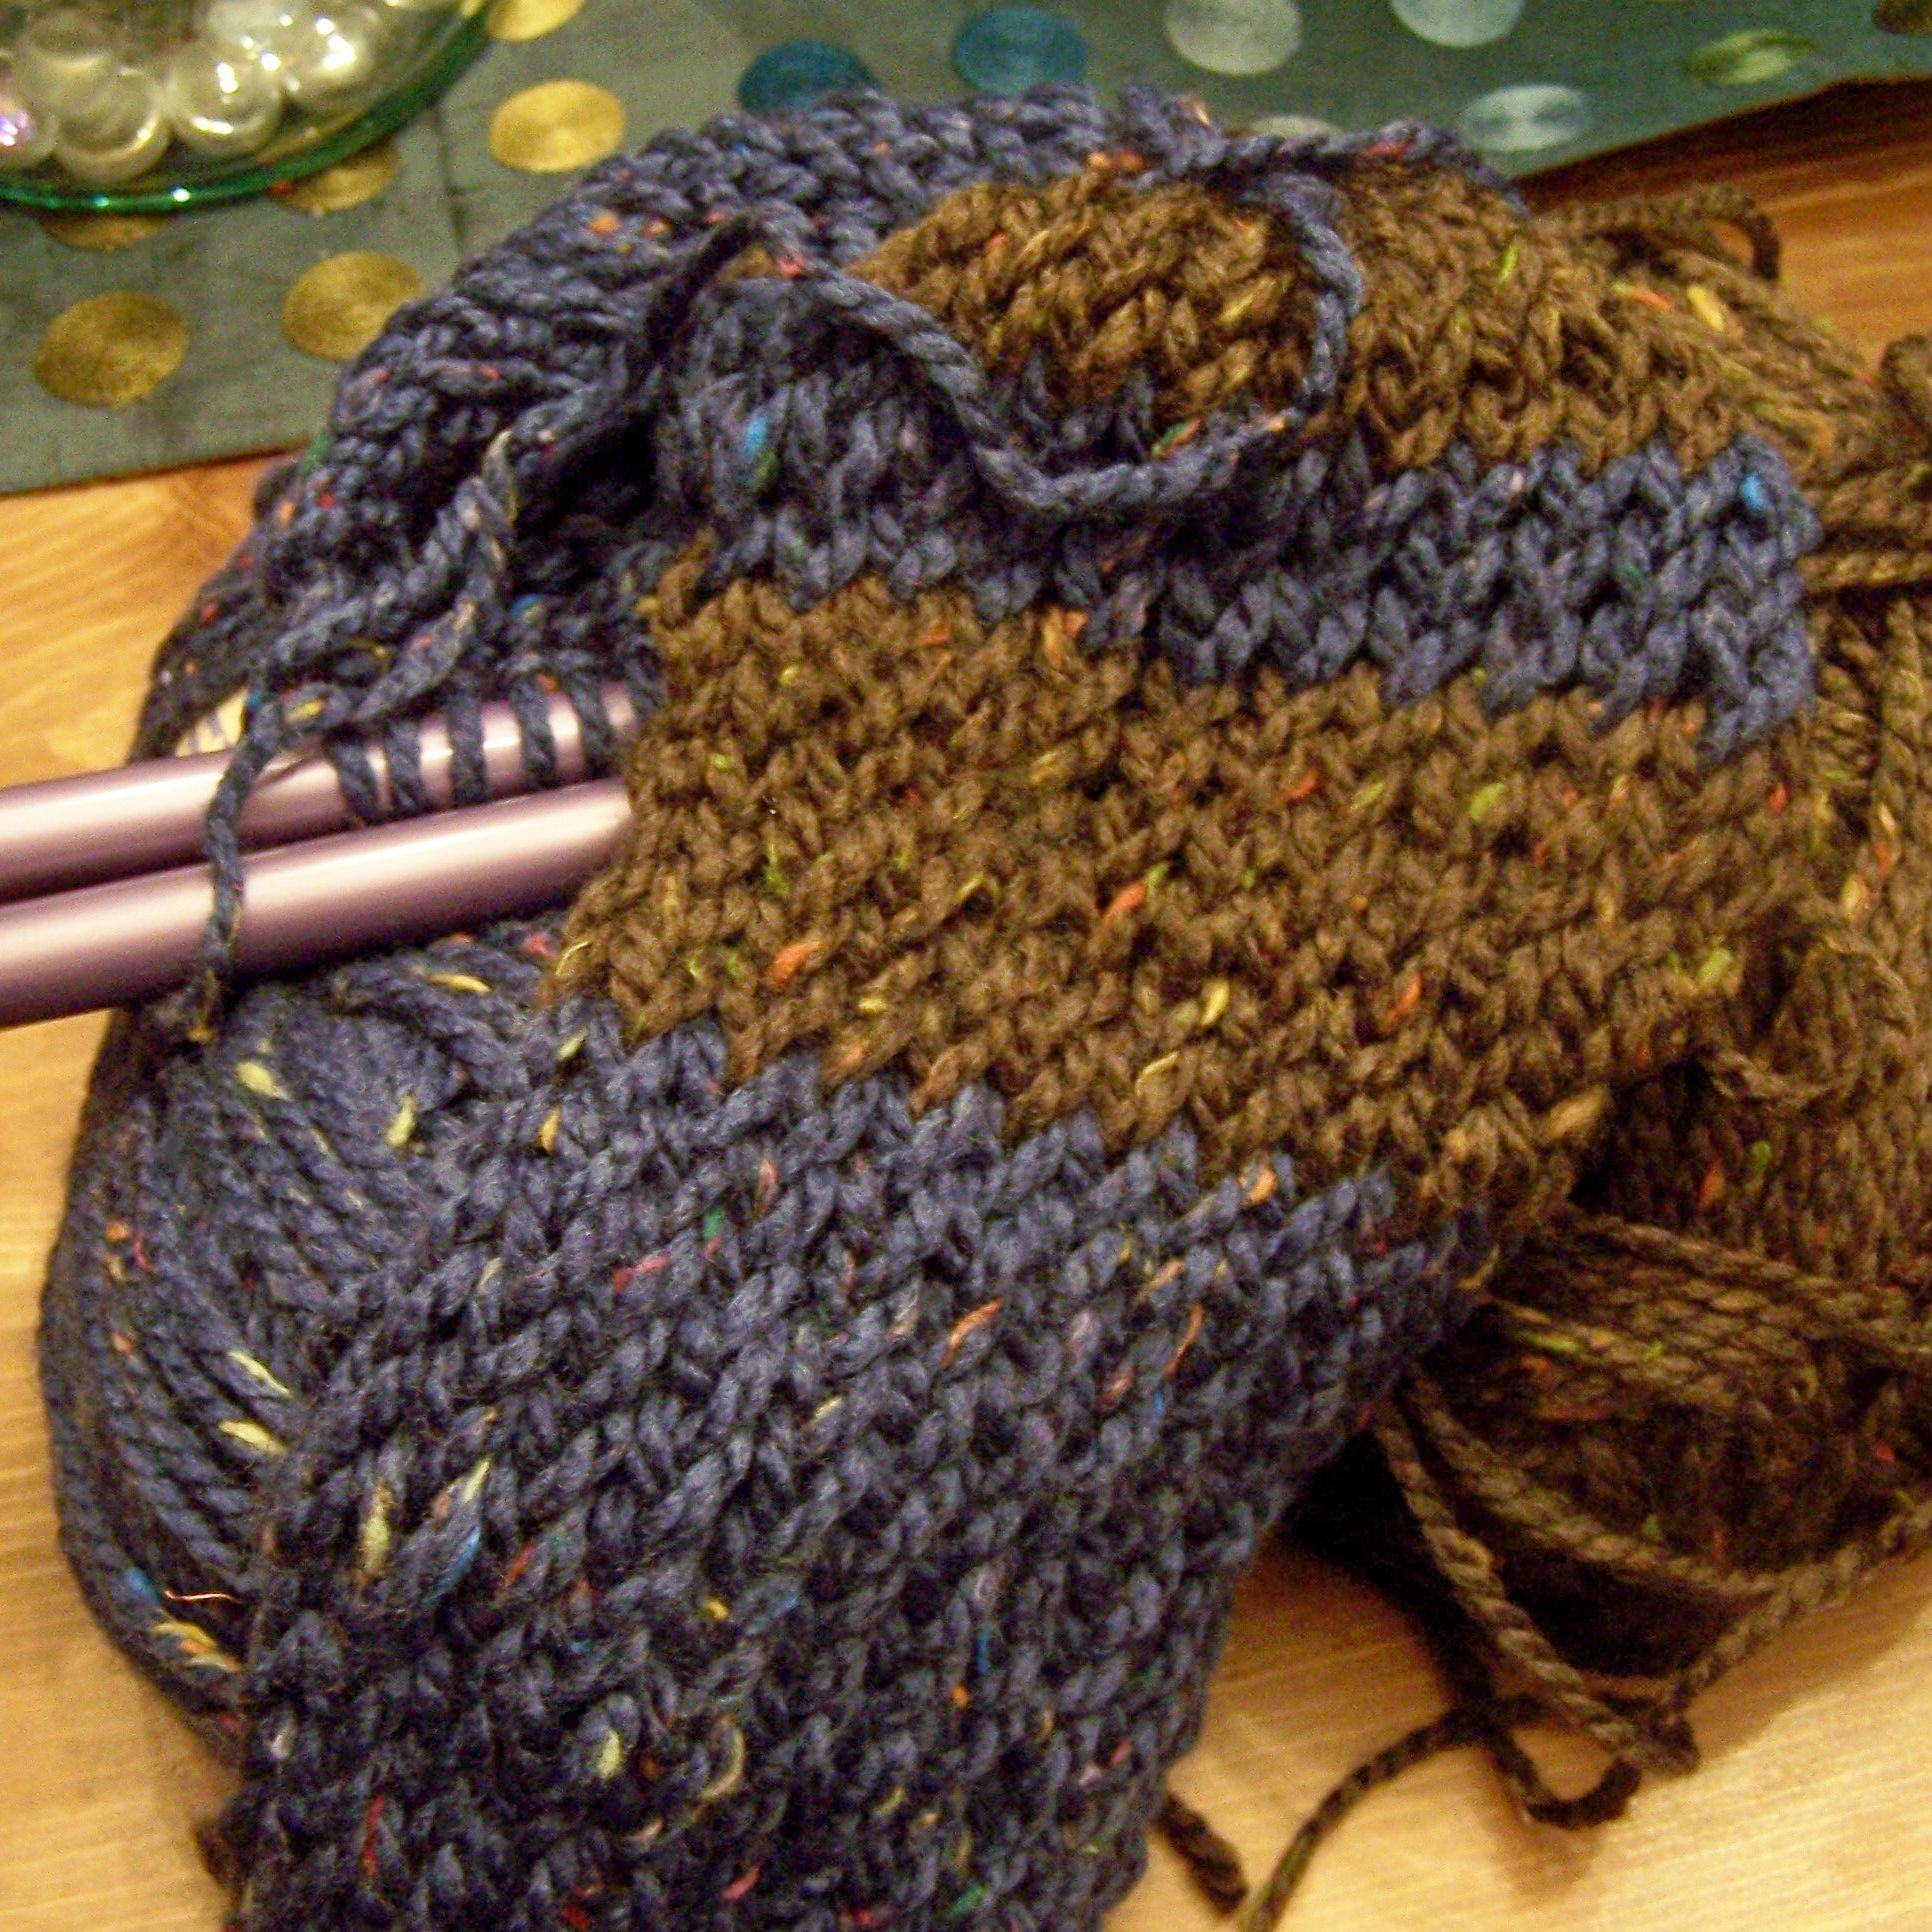 Hogwarts House Scarf Knitting Pattern How To Make A Ravenclaw Scarf